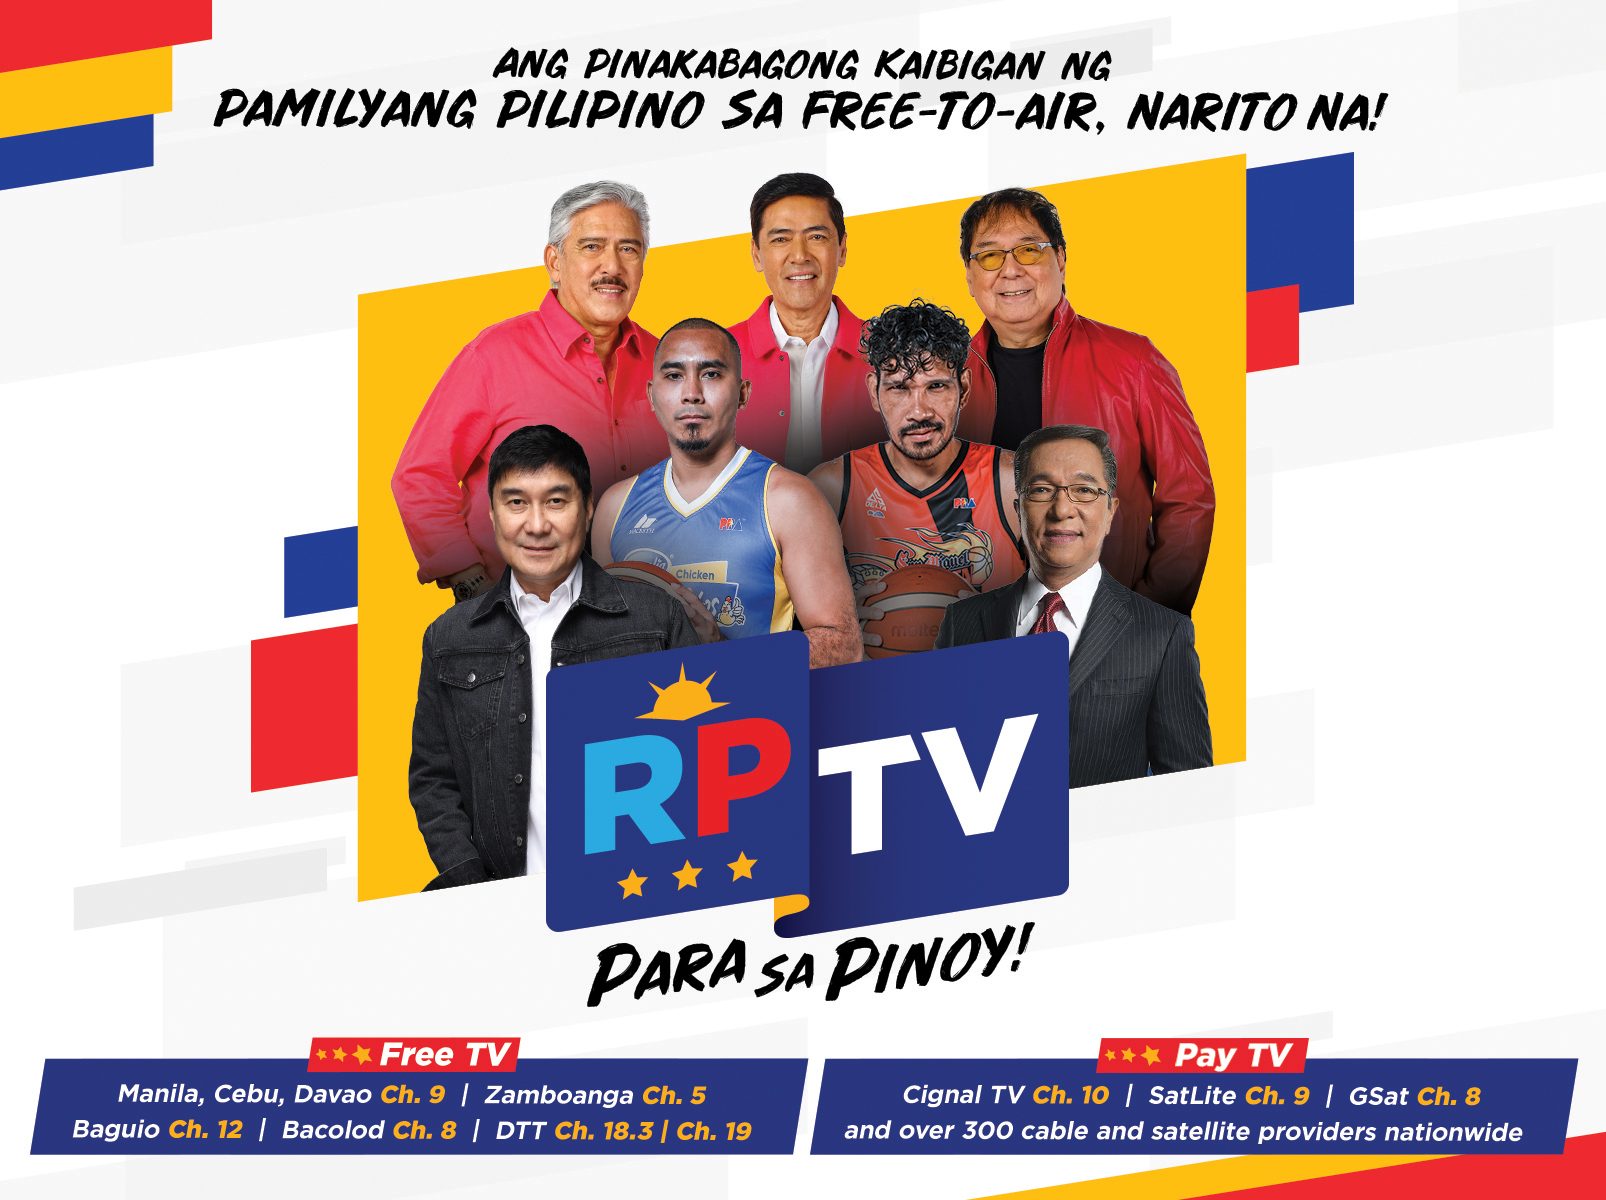 After CNN PH closure, Manny Pangilinan’s TV5 launches RPTV on Channel 9